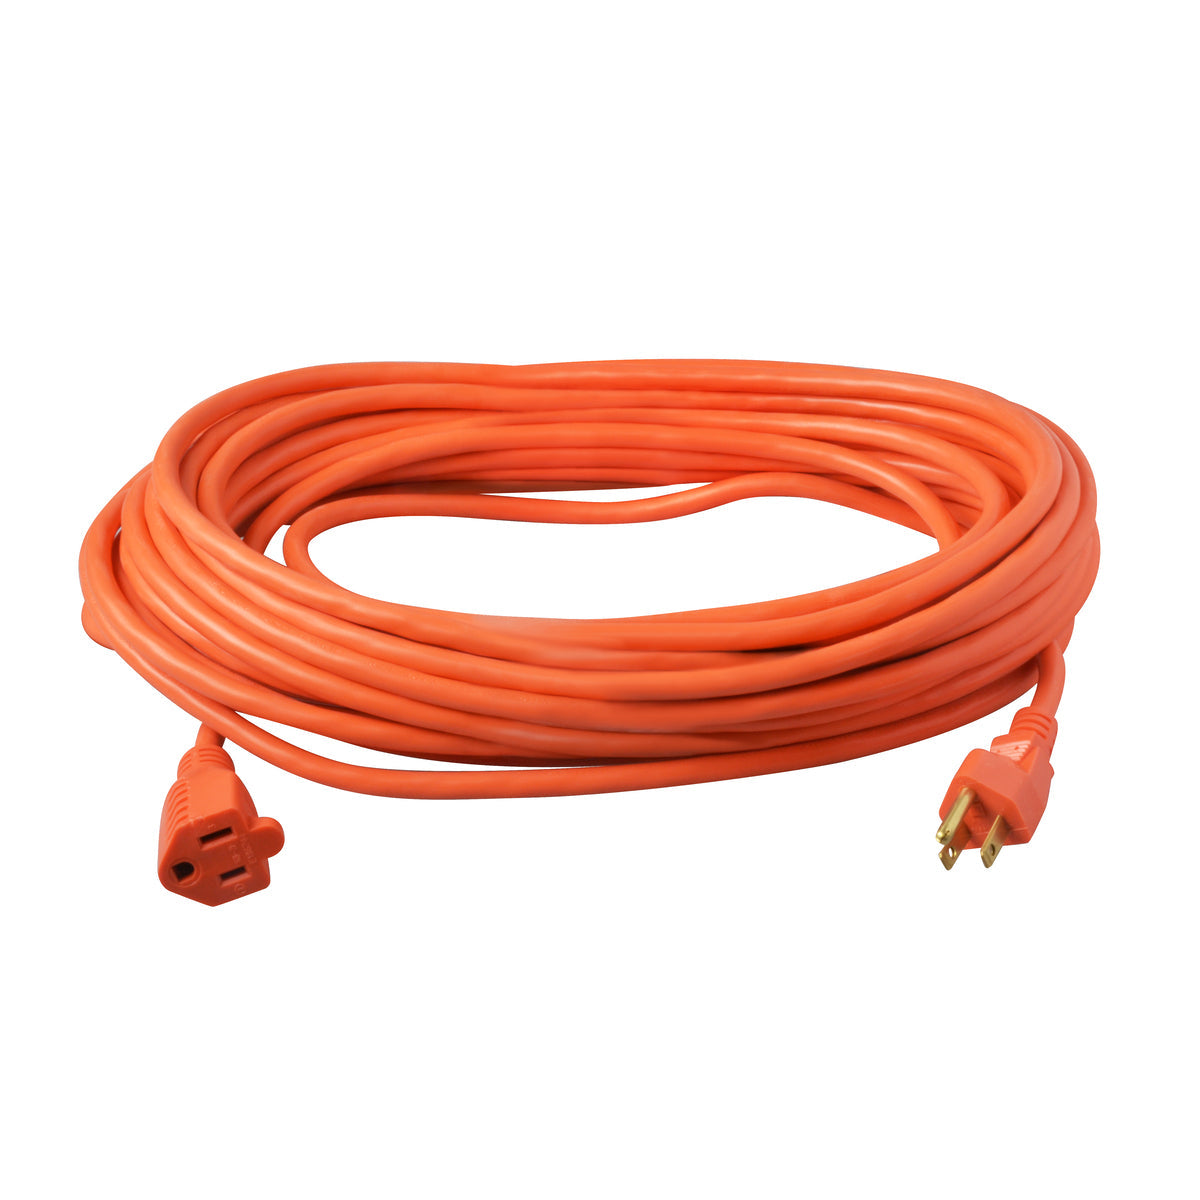 Southwire Company 16/3 Medium-Duty 13-Amp SJTW General Purpose Extension  Cord, 50-Feet - Oley, PA - Oley Valley Feed